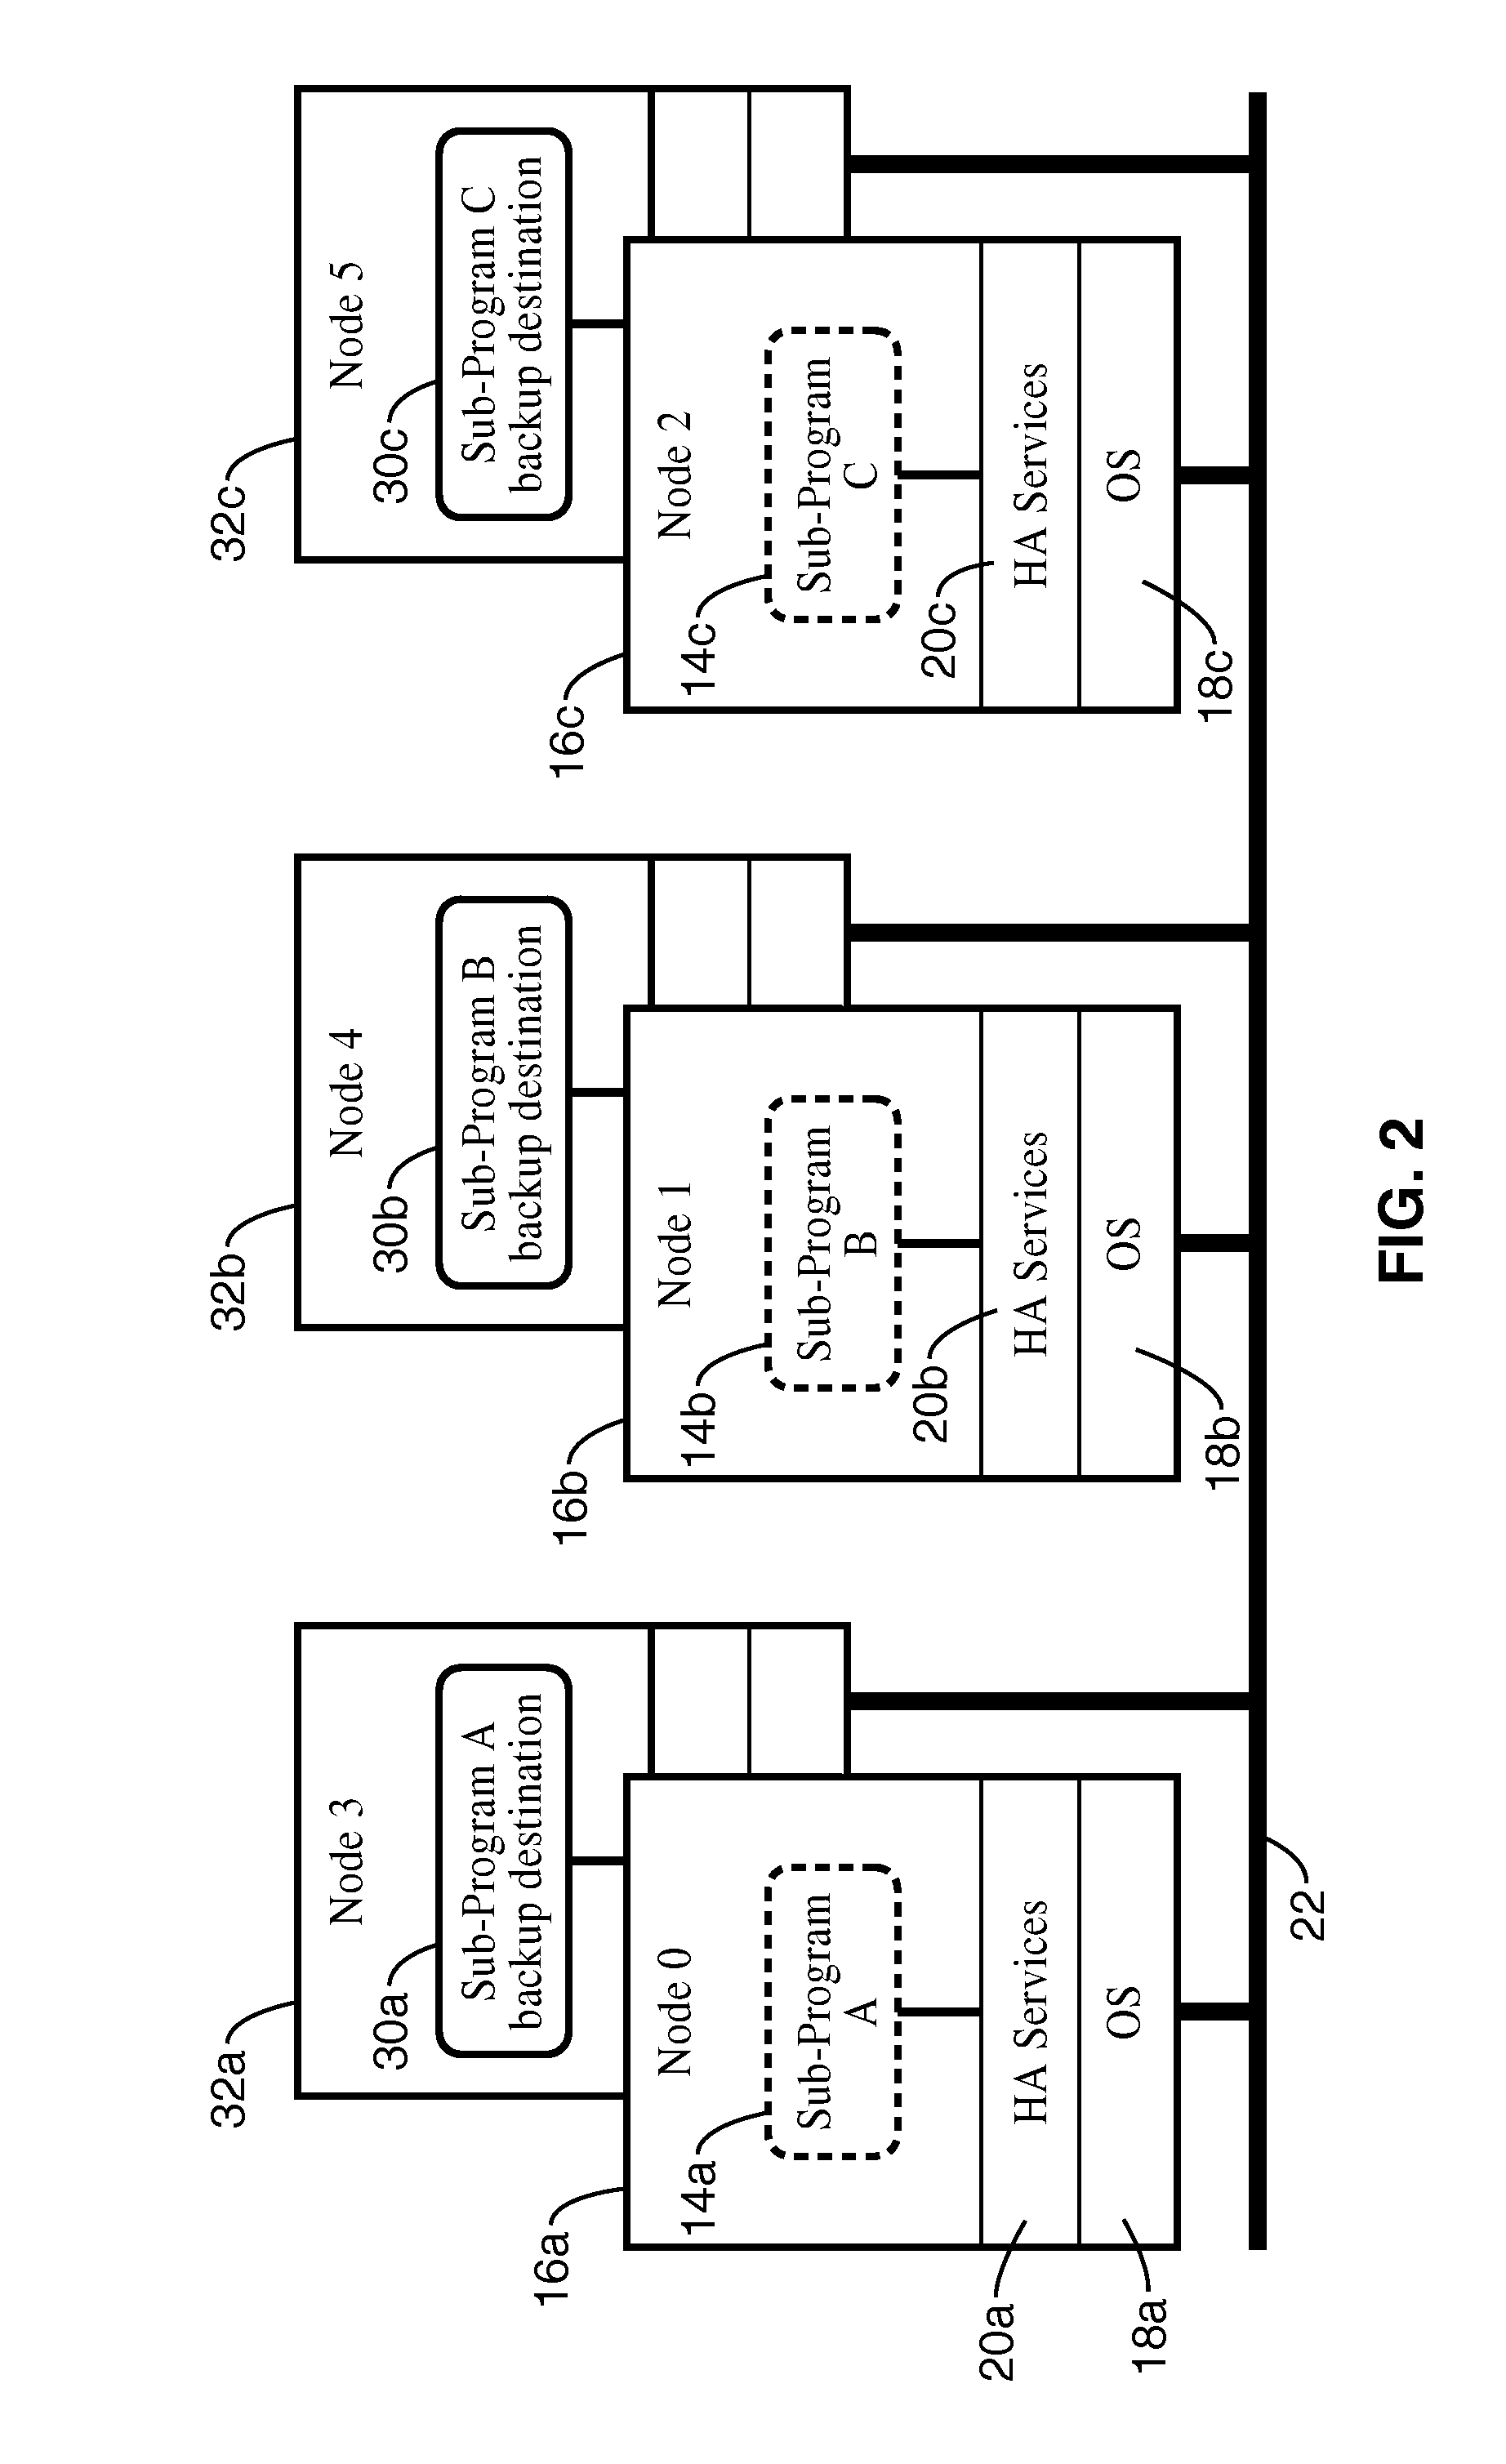 Method and system for providing high availability to distributed computer applications